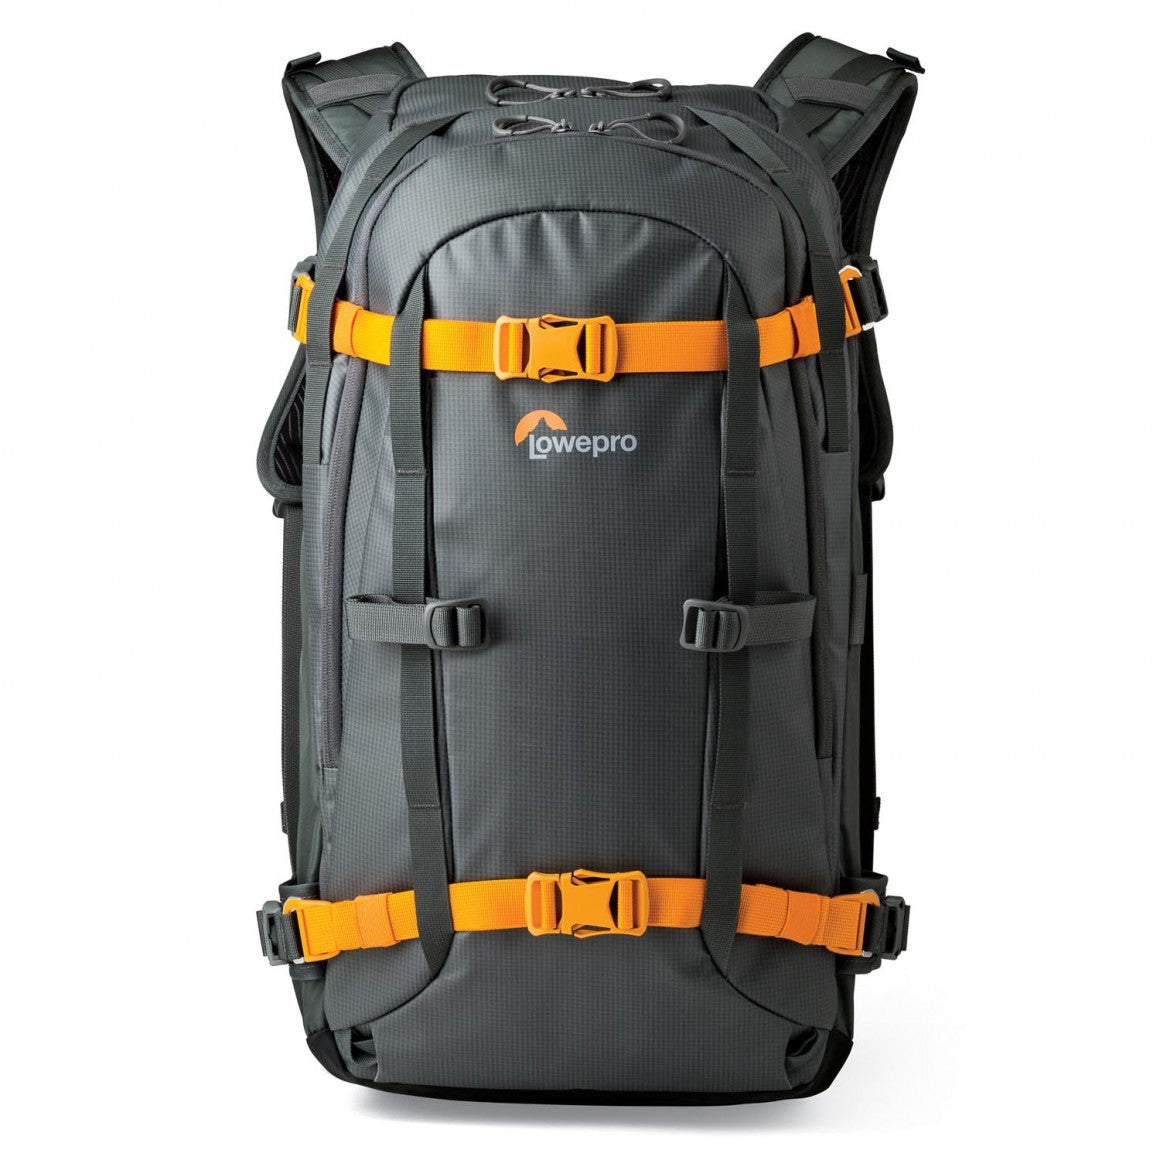 Lowepro Whistler 450AW Backpack (Grey), bags backpacks, Lowepro - Pictureline  - 1